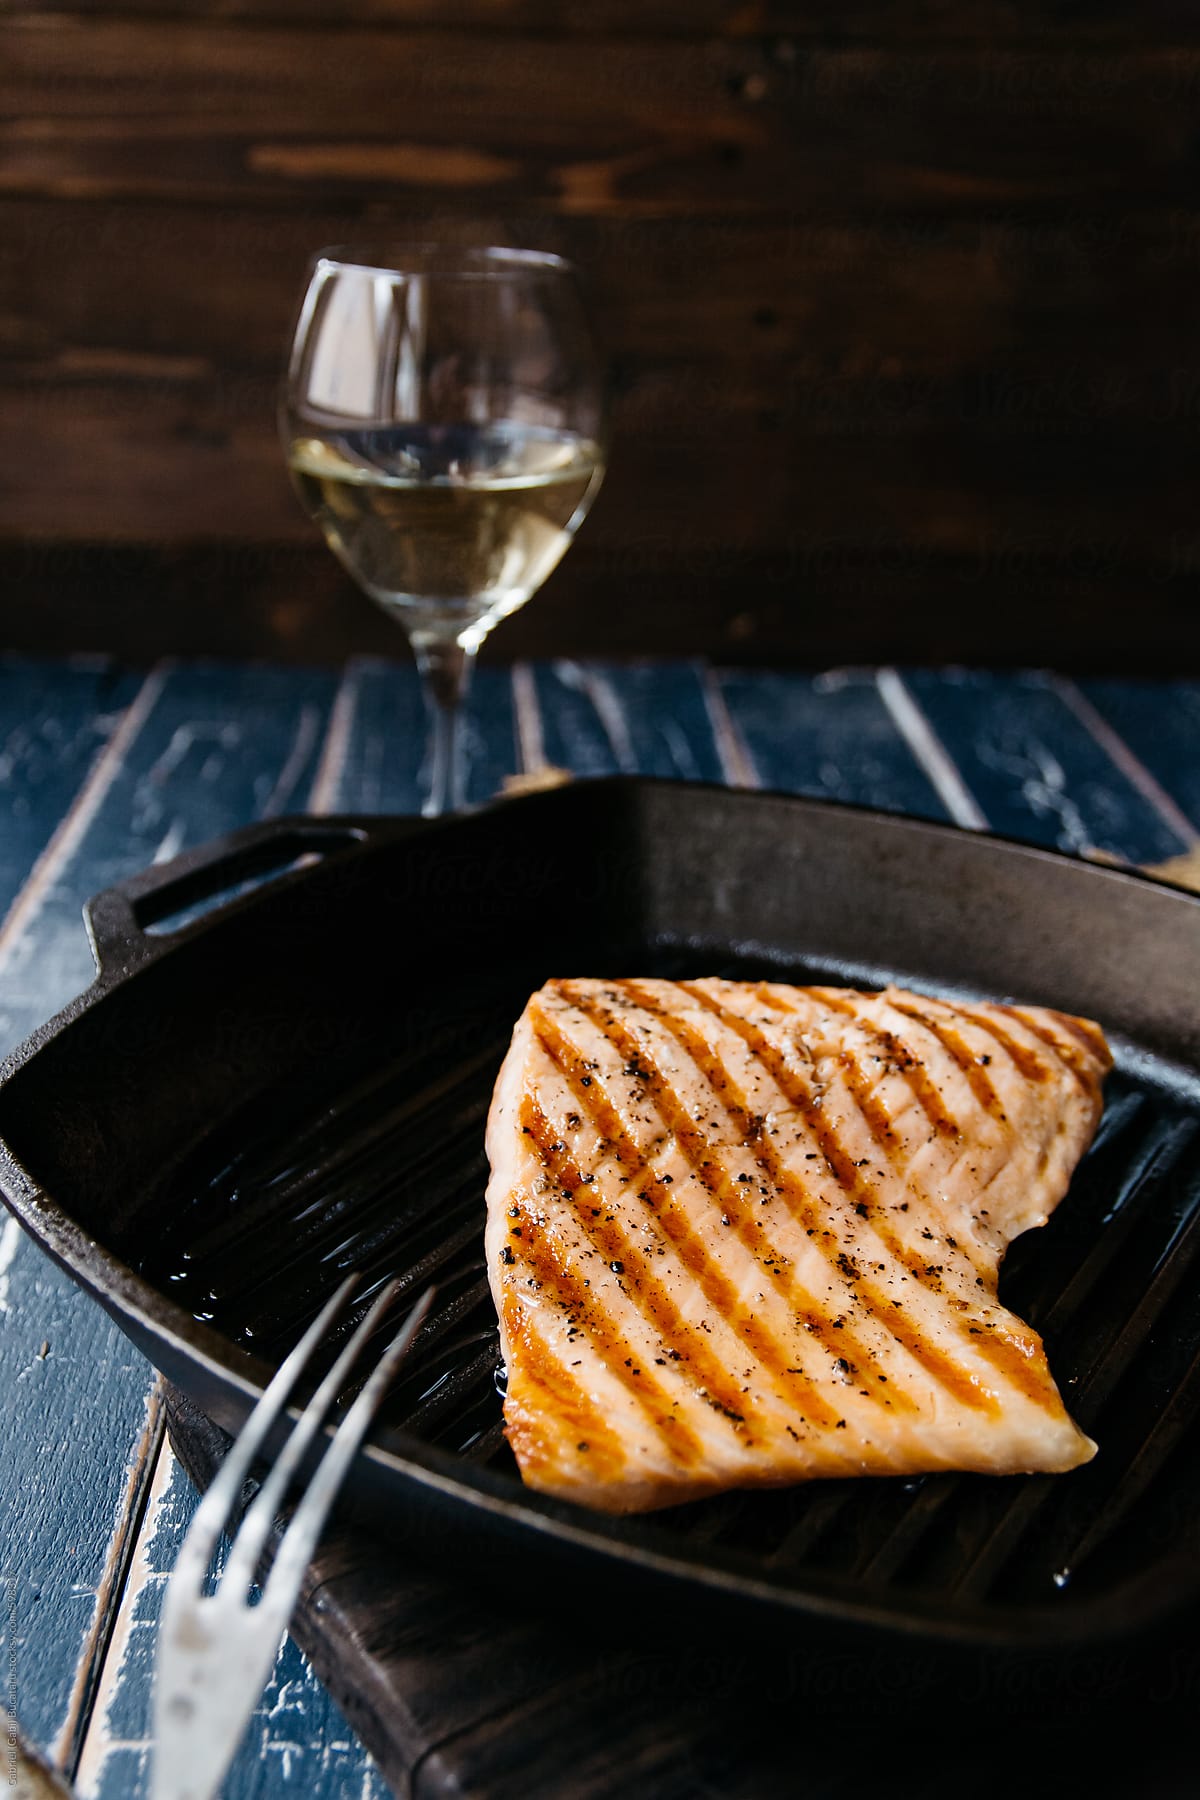 Grilled salmon in a cast iron griddle pan with a glass of white wine